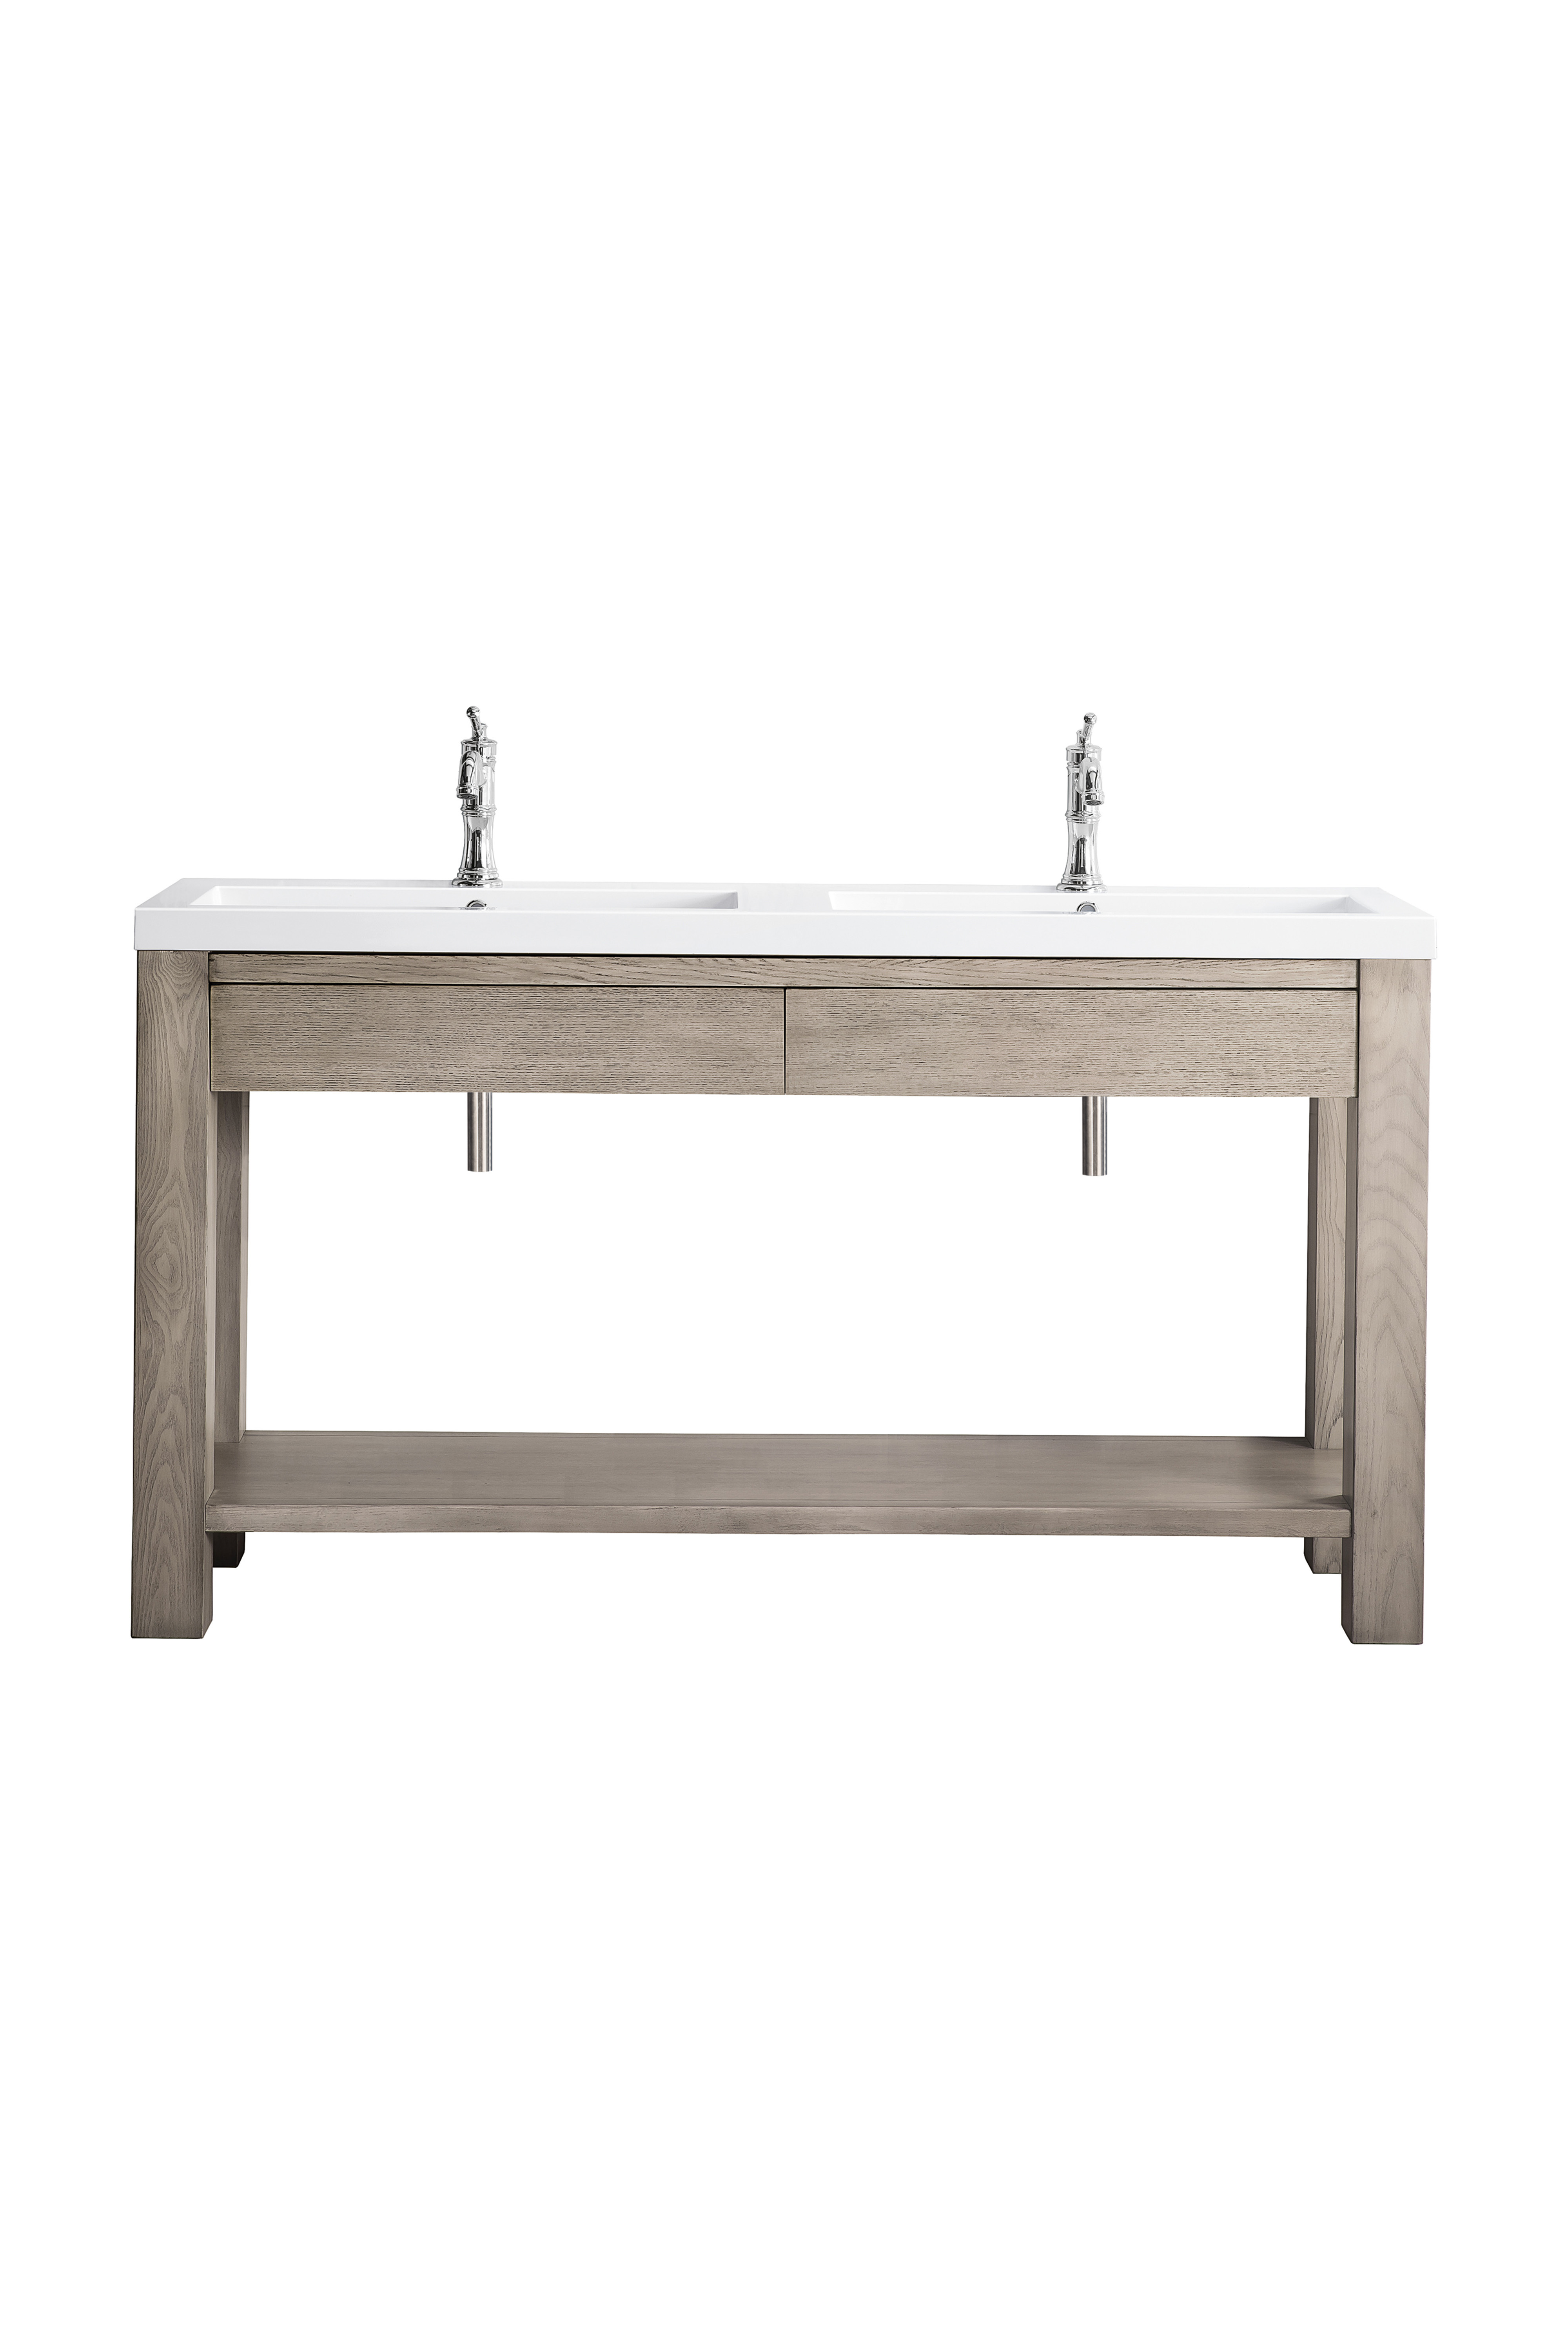 James Martin C205V63PTAWG Brooklyn 63" Wooden Sink Console, Platinum Ash w/ White Glossy Composite Countertop - Click Image to Close